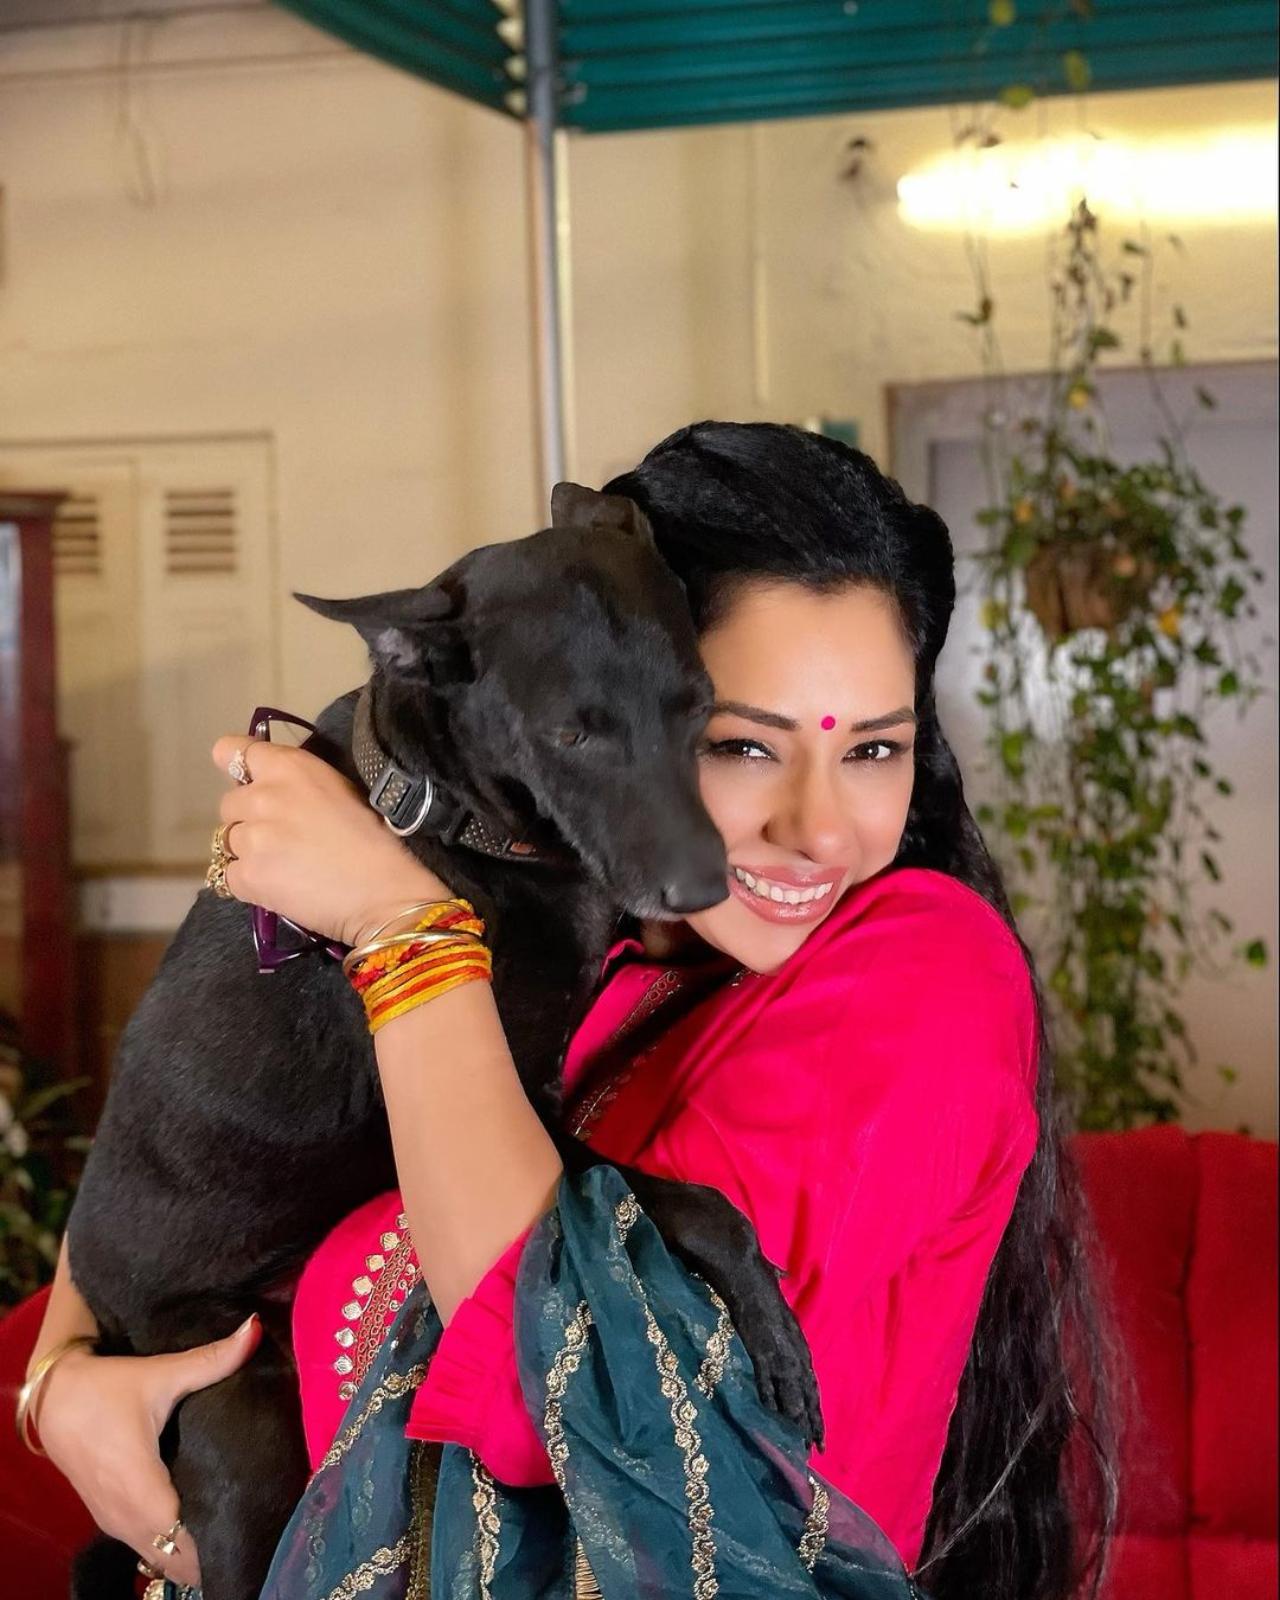 Rupali Ganguly
Rupali shares her life with a beloved pet—an adorable black dog named Kishmish. This furry companion adds immense joy and warmth to her life